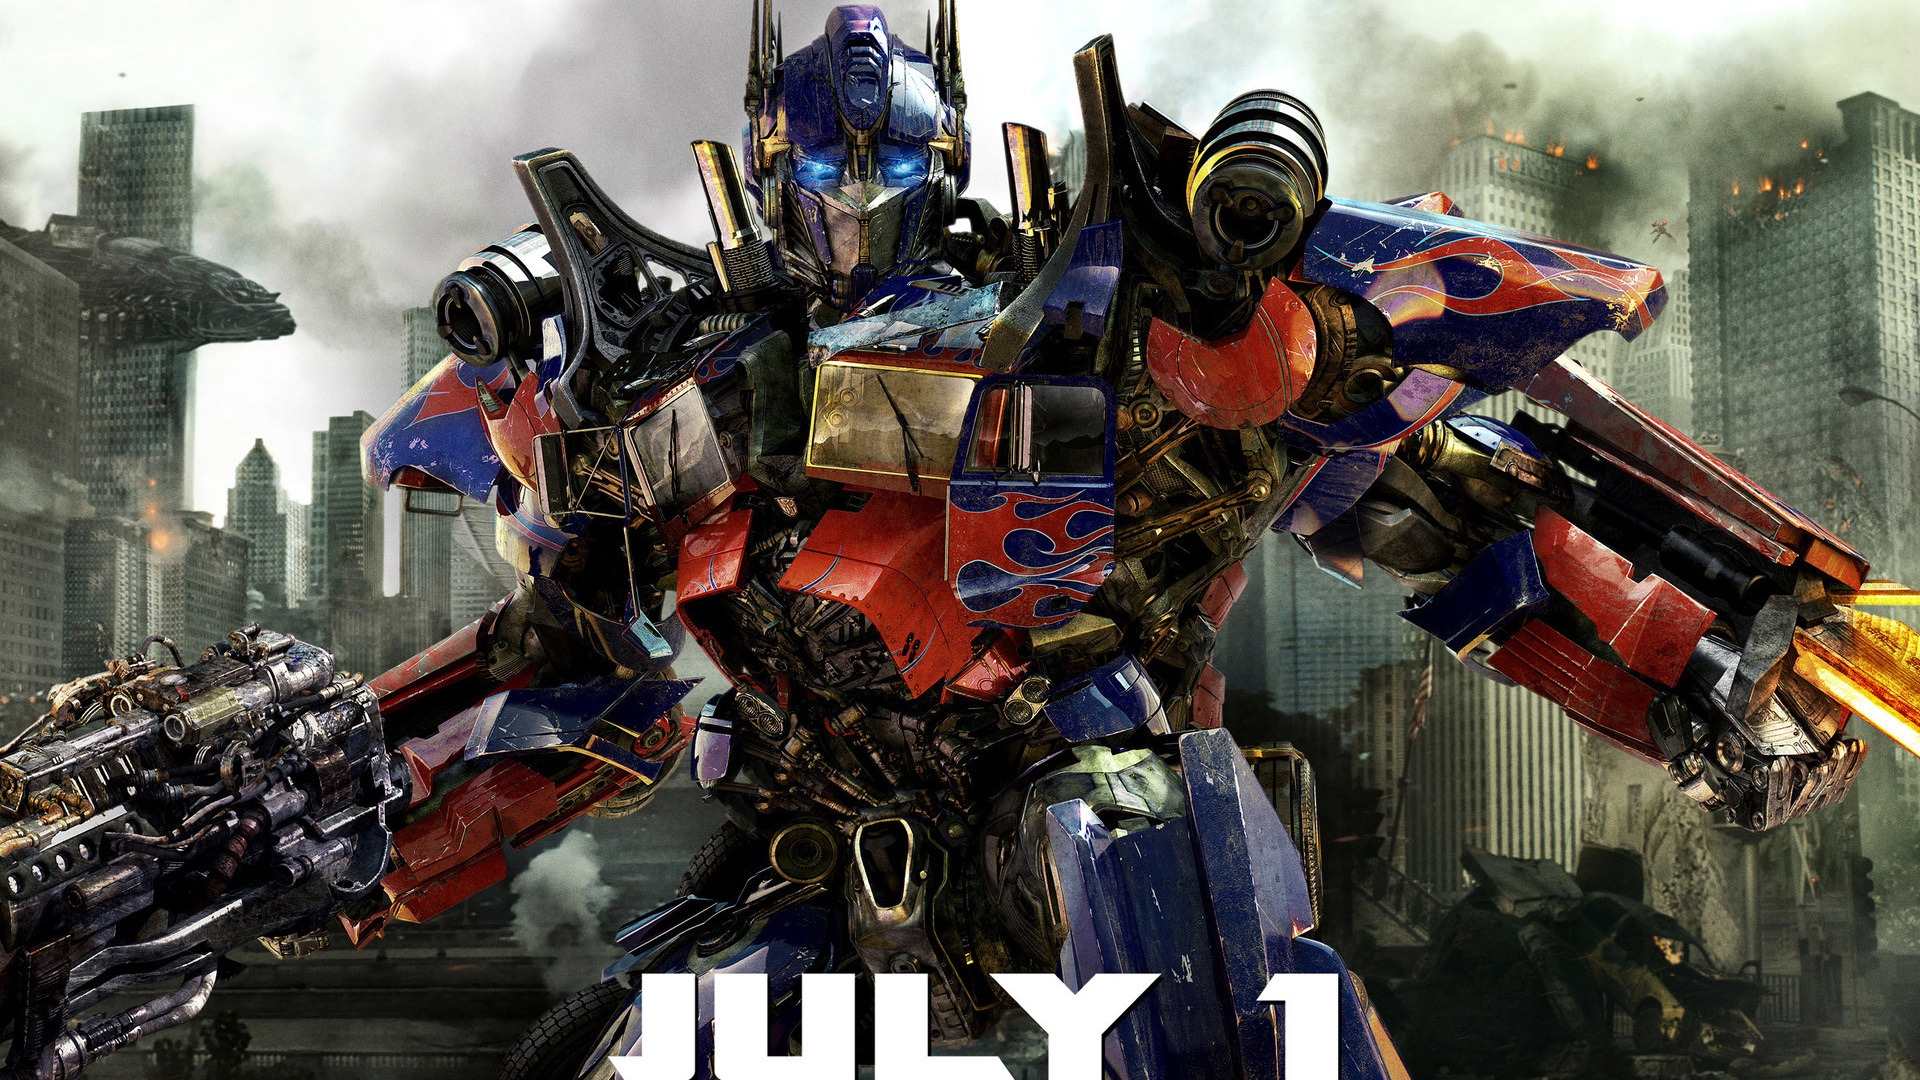 Transformers 3 Dark of the Moon for 1920 x 1080 HDTV 1080p resolution